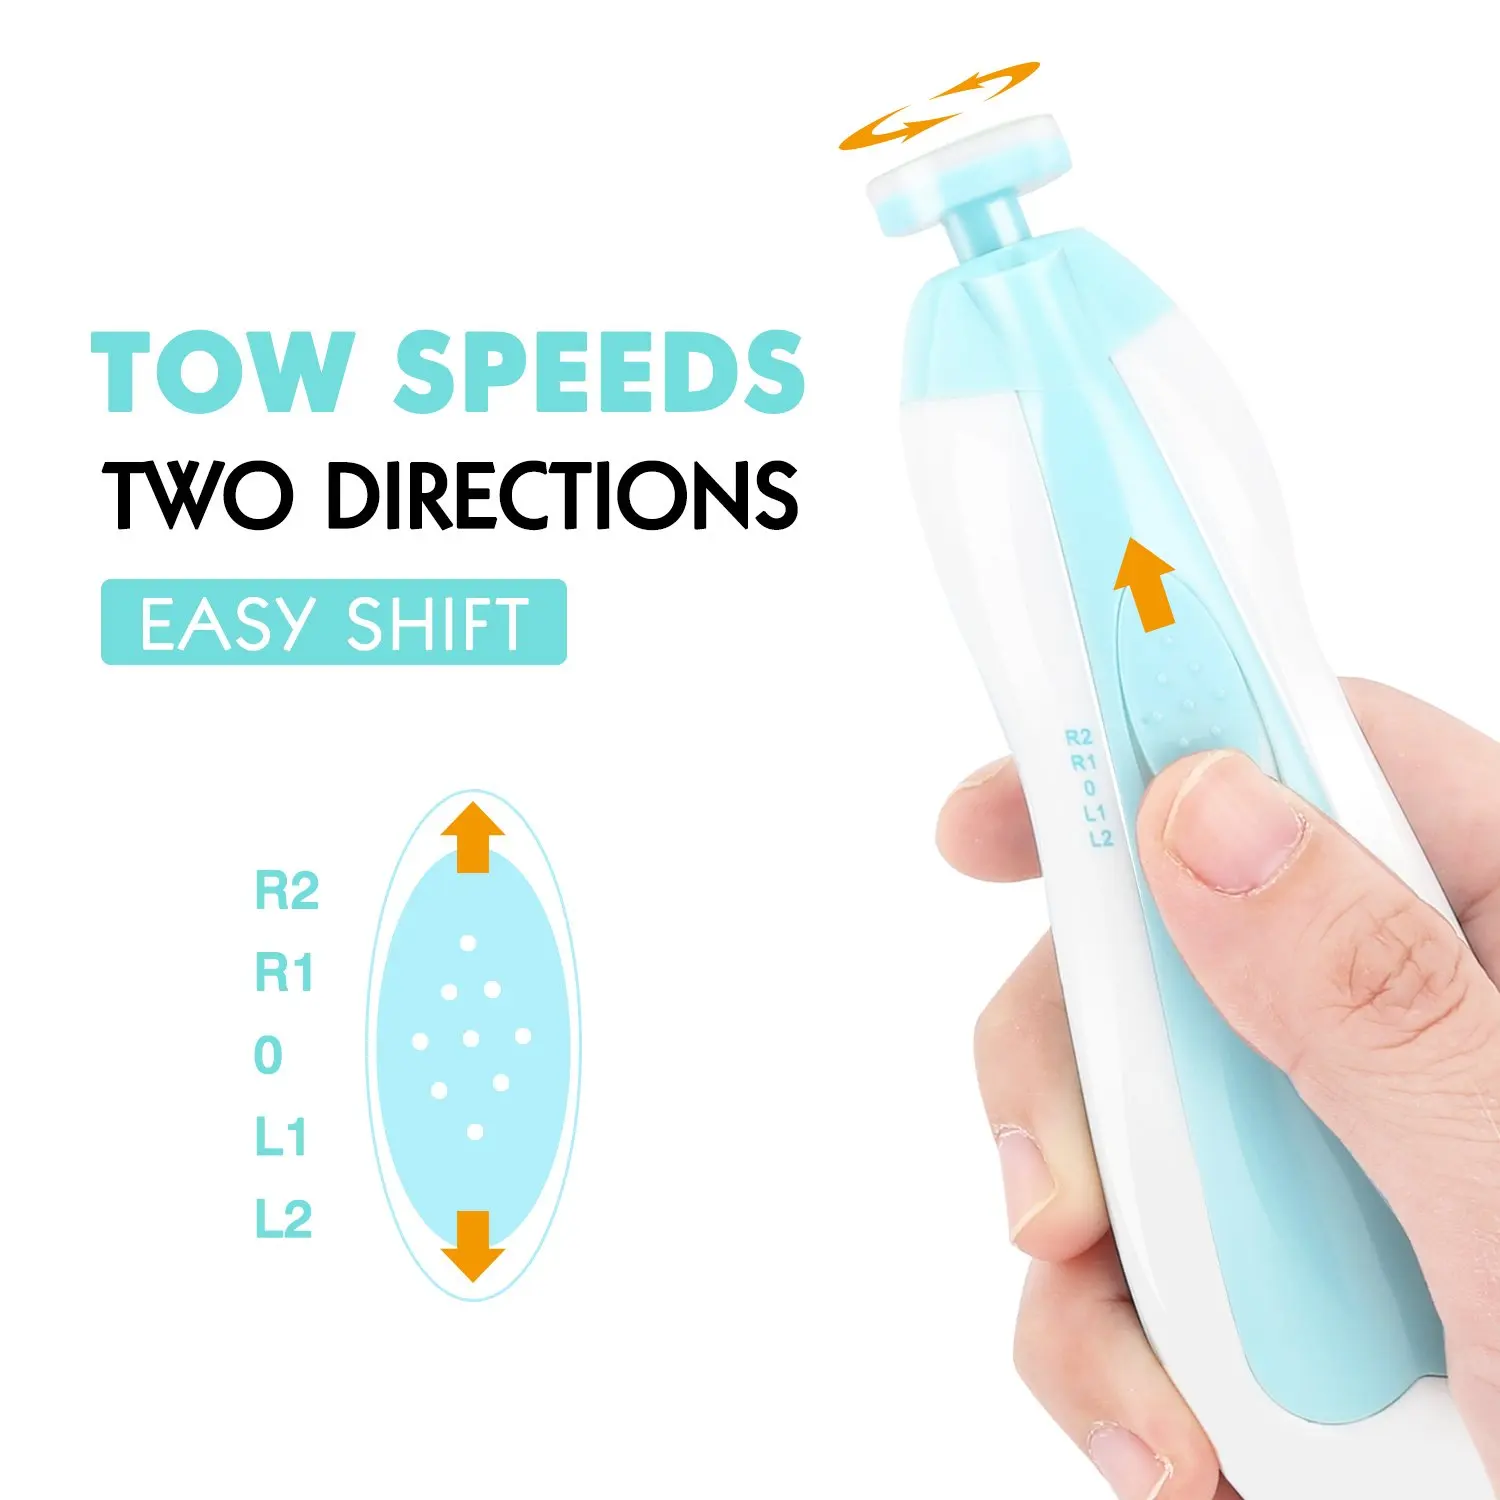 
Electric Baby Nail Trimmer File clippers Manicure Set with LED Light for Newborn 